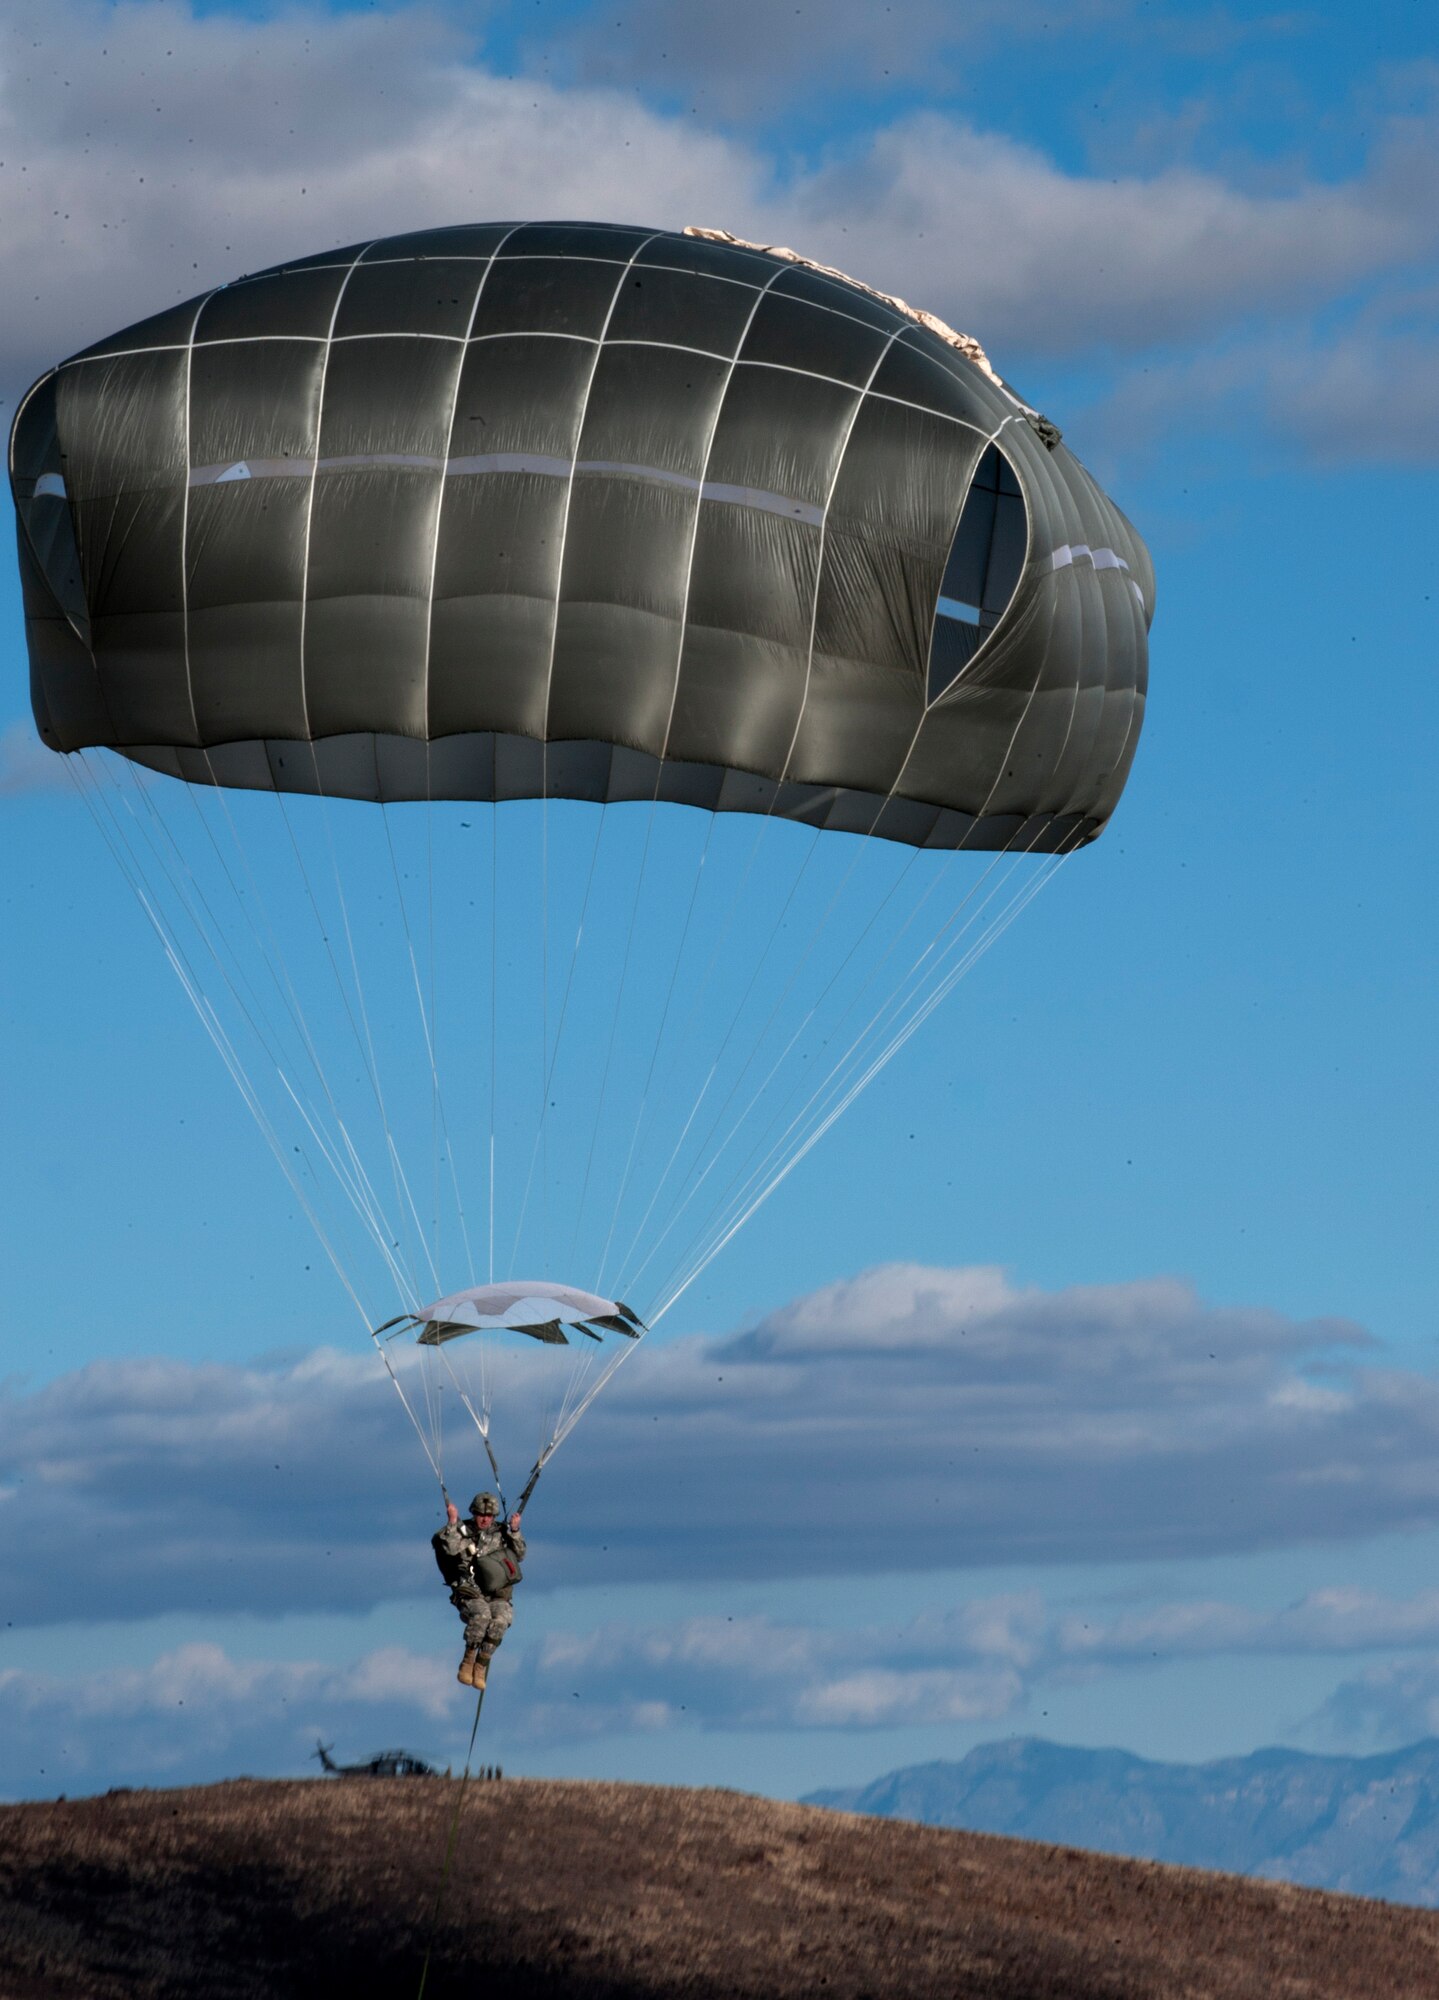 A paratrooper assigned to the 3rd Brigade Combat Team, 82nd Airborne Division, Fort Bragg, N.C., glides to a landing during the U.S. Air Force Weapons School's Joint Forcible Entry Exercise 14B on the Nevada Test and Training Range Dec. 6, 2014. JFEX, as part of a restructured integration phase in the USAFWS, is a prime example of the advanced training students receive throughout this course that is unmatched anywhere else in the world. (U.S. Air Force photo by Staff Sgt. Victoria Sneed)